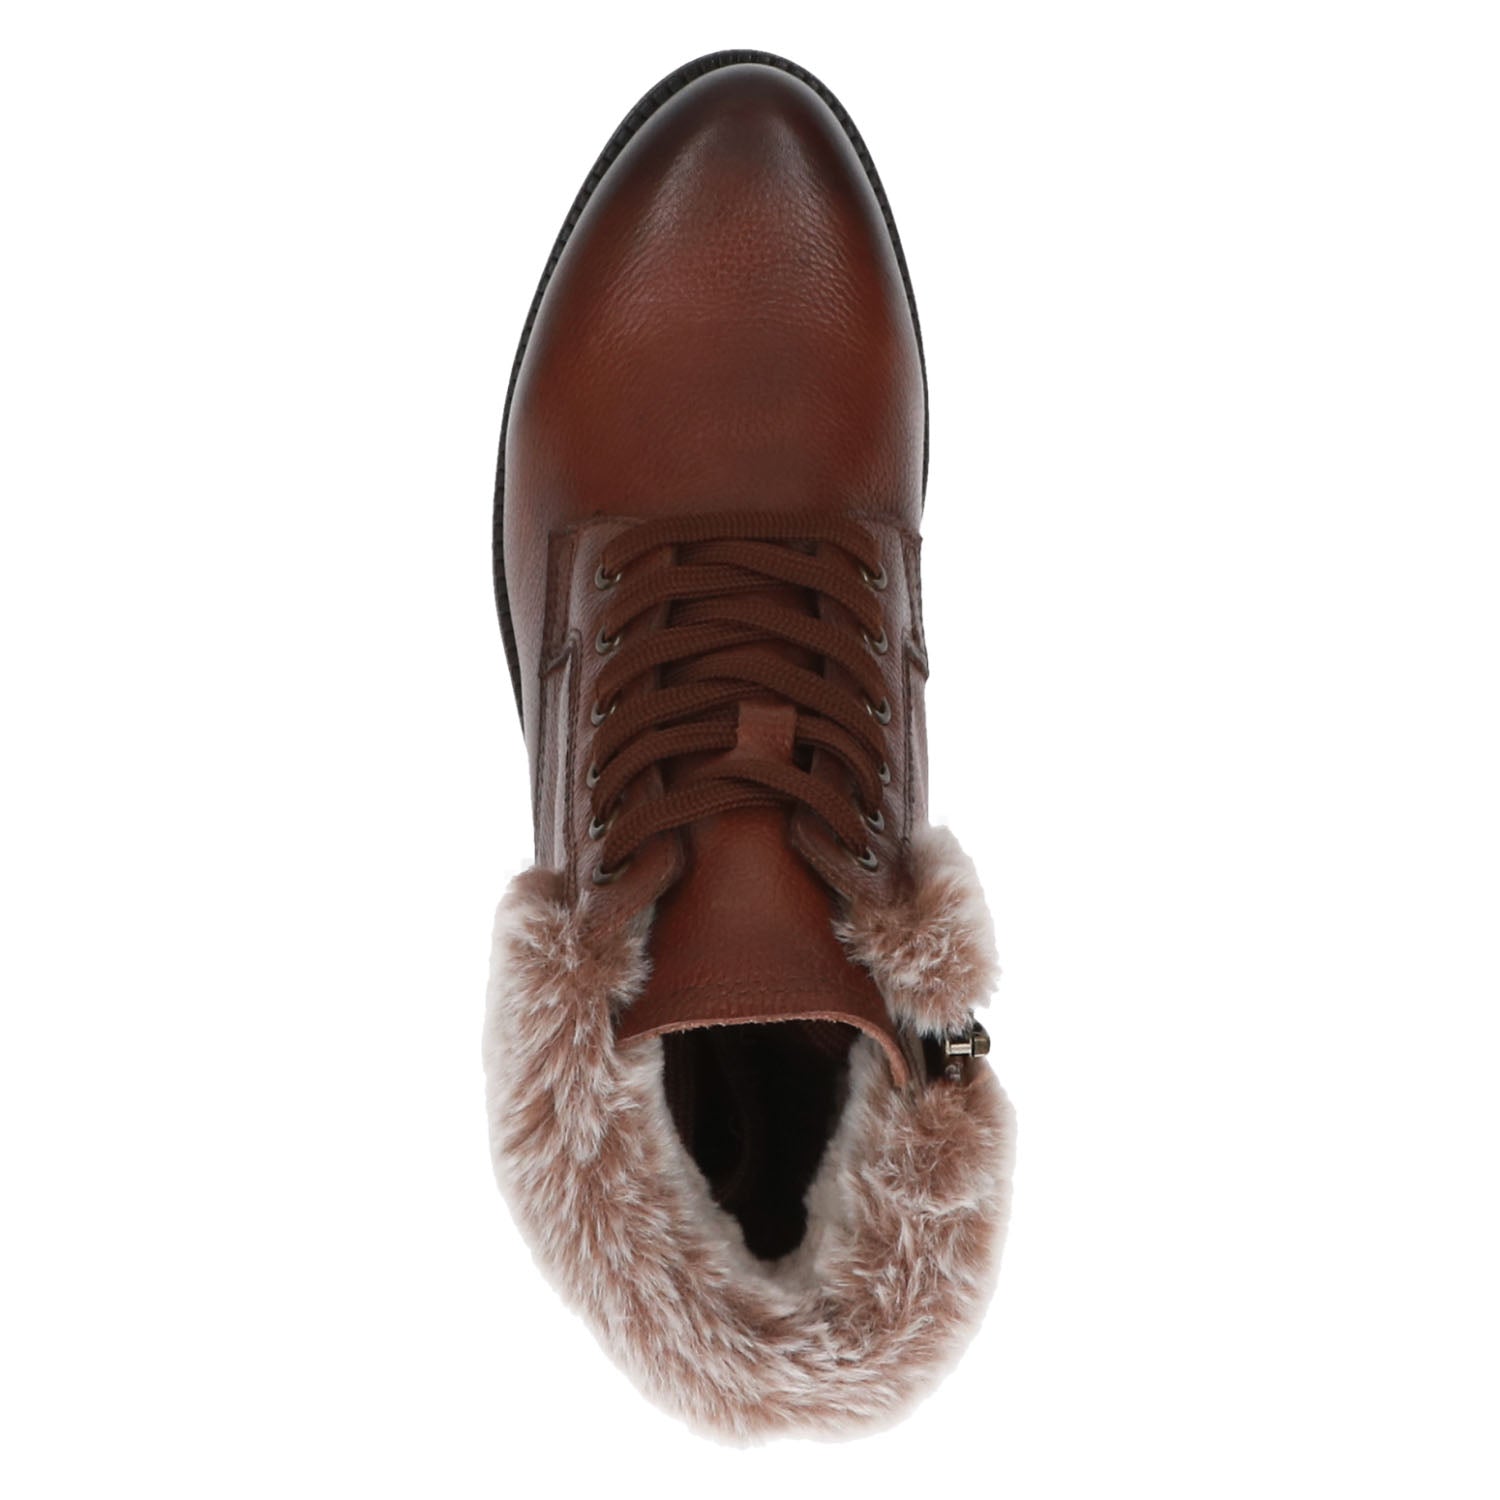 Top view showcasing the fur lining of the Caprice Ankle Boot.